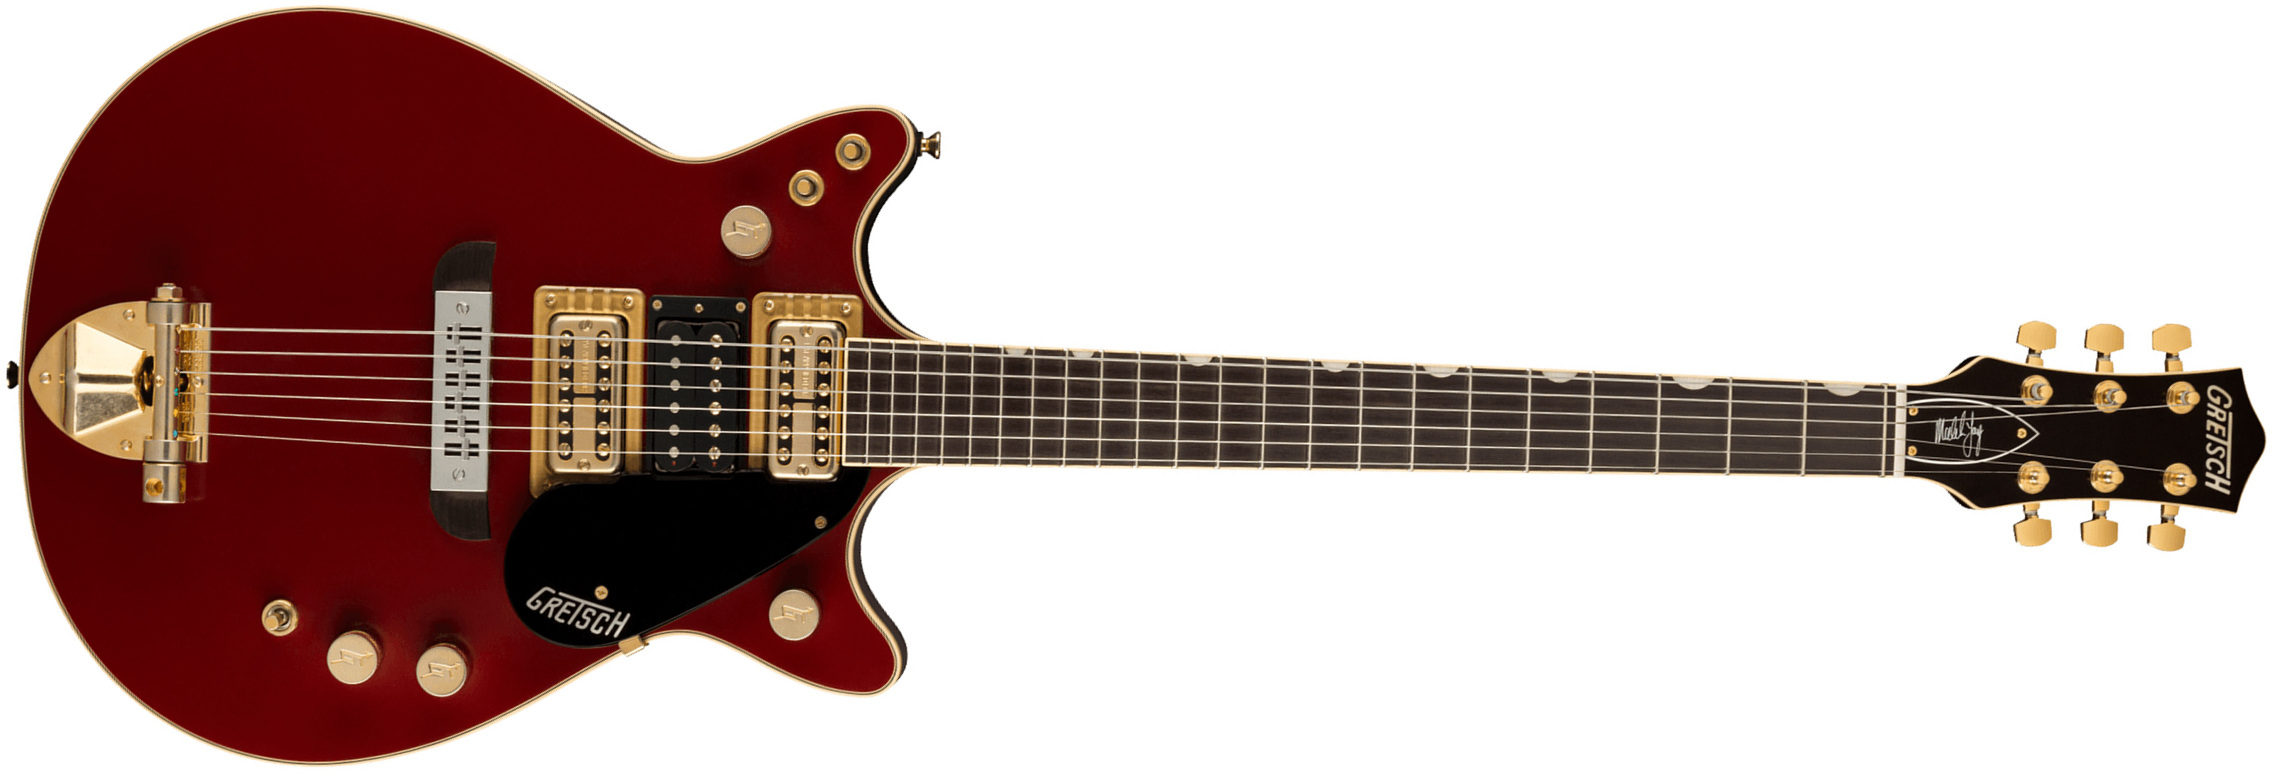 Gretsch Malcolm Young G6131g-my-rb Jet Ltd Signature 3h Ht Eb - Vintage Firebird Red - Double Cut E-Gitarre - Main picture